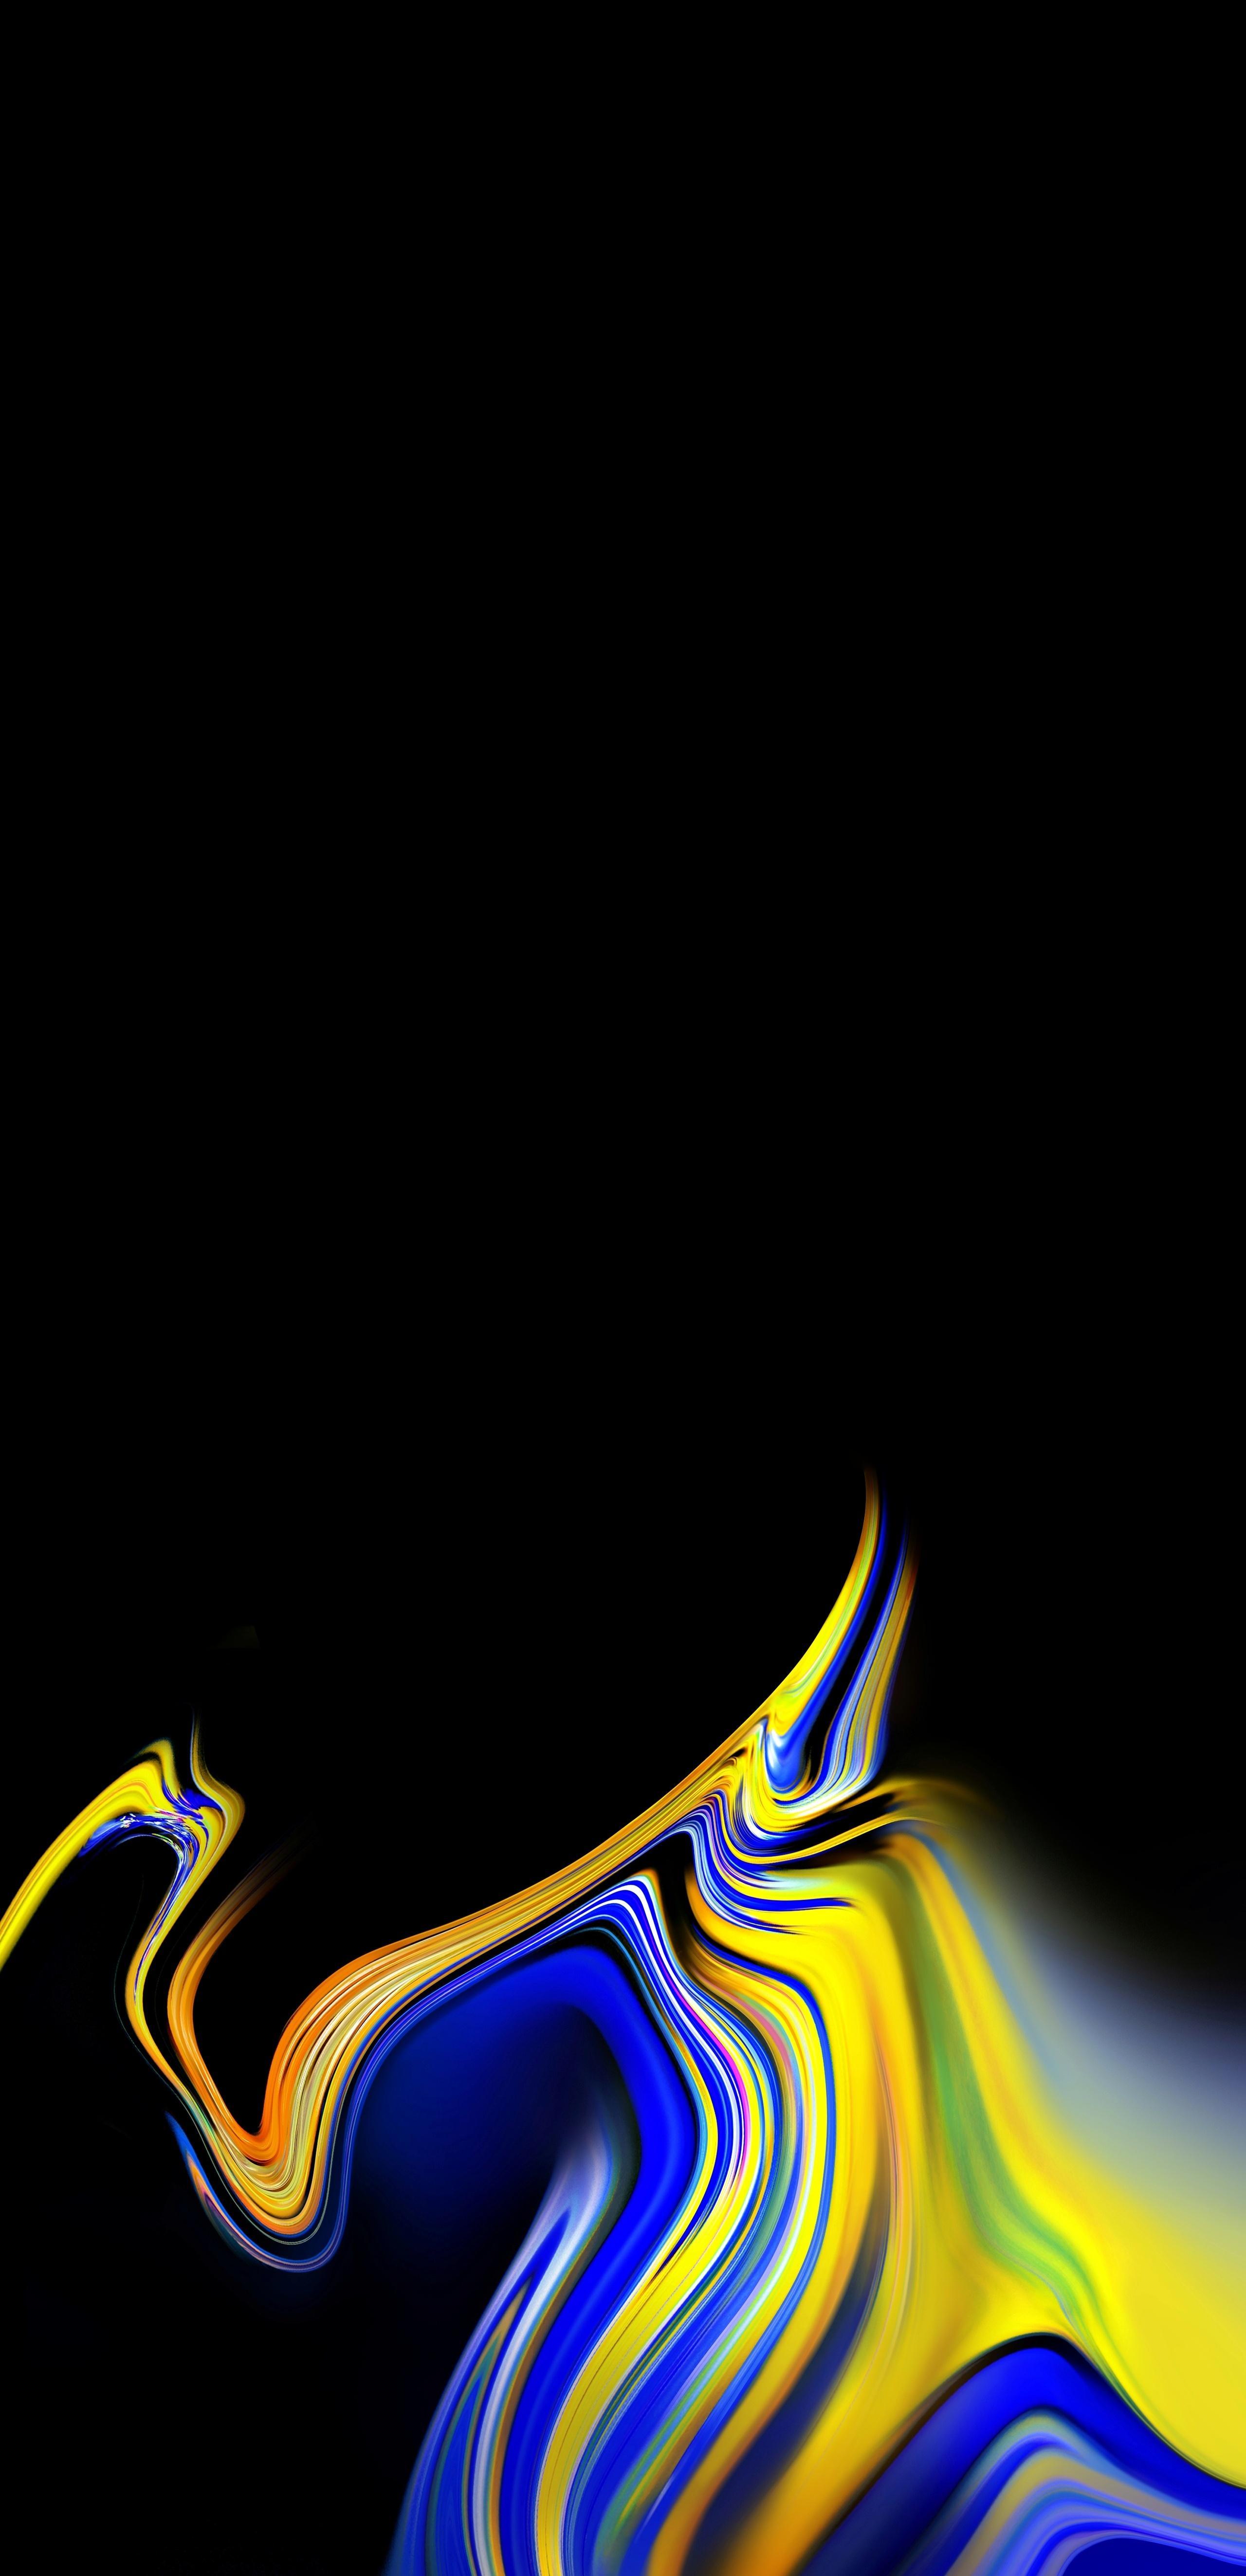 AMOLED BLACK Expended Samsung Note 9 Stock Wallpaper